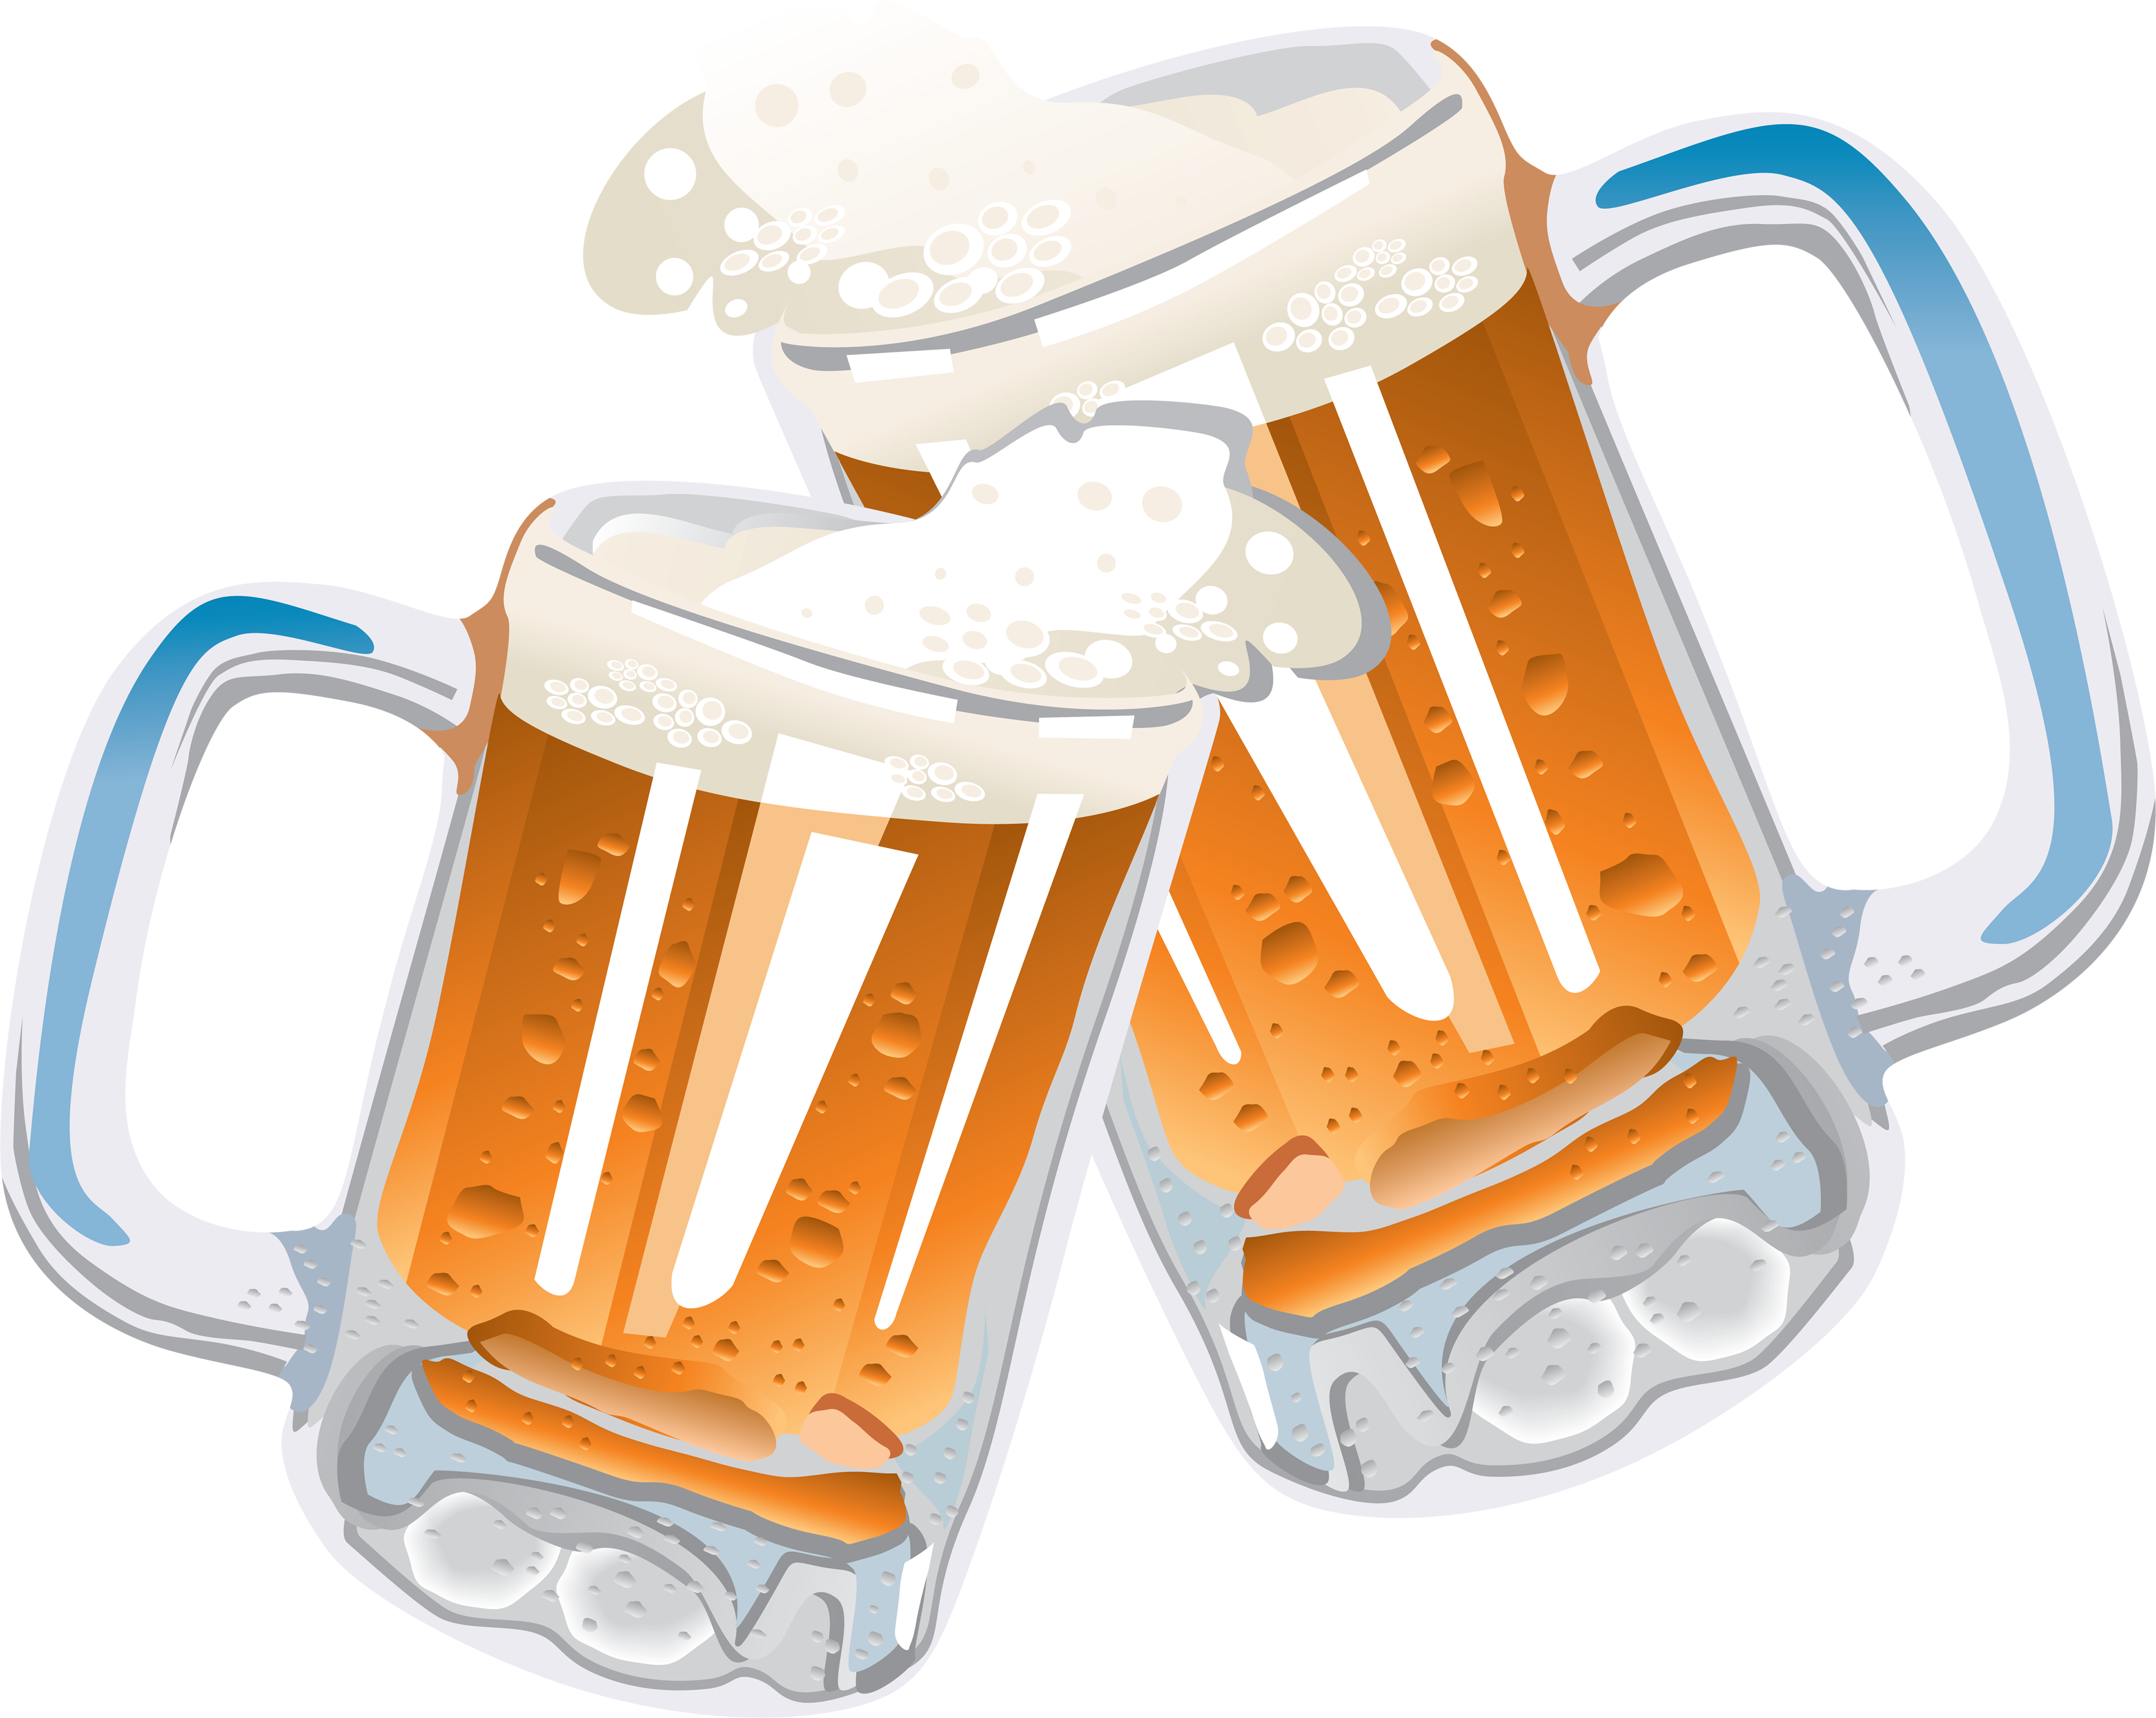 Image result for free. Alcohol clipart cheer